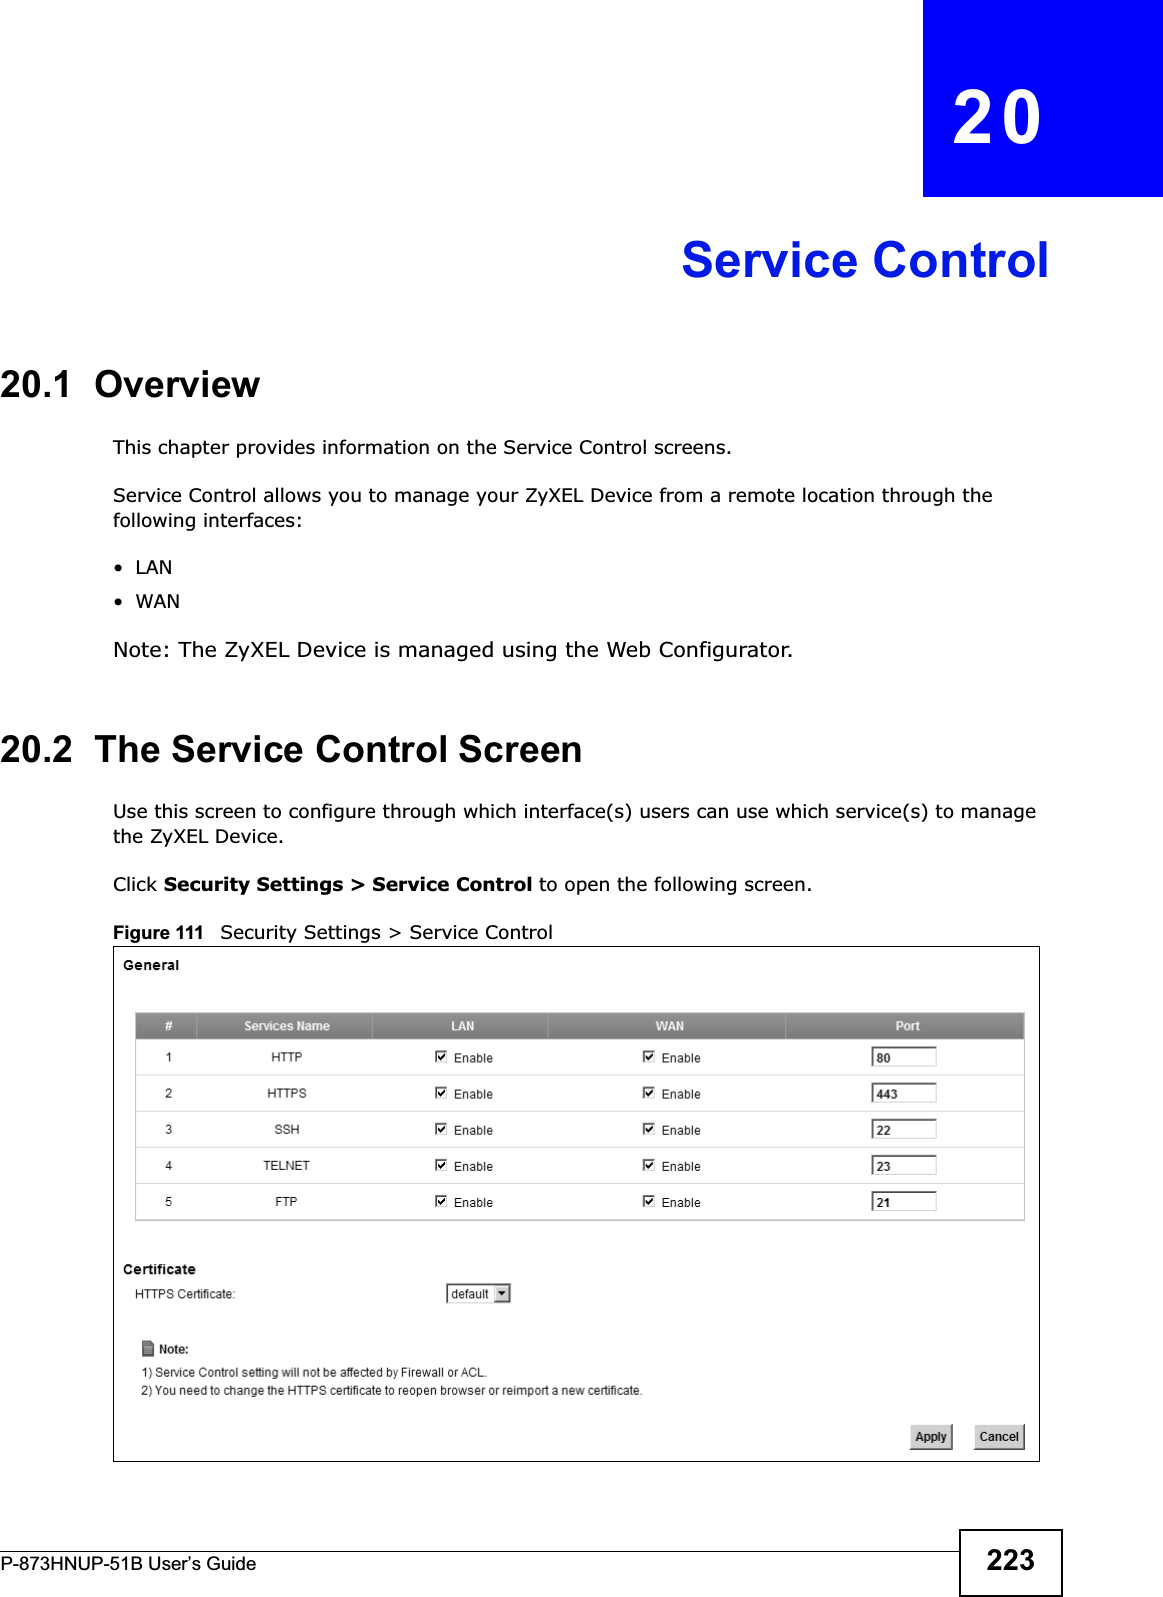 P-873HNUP-51B User’s Guide 223CHAPTER   20Service Control20.1  OverviewThis chapter provides information on the Service Control screens. Service Control allows you to manage your ZyXEL Device from a remote location through the following interfaces:•LAN•WANNote: The ZyXEL Device is managed using the Web Configurator.20.2  The Service Control ScreenUse this screen to configure through which interface(s) users can use which service(s) to manage the ZyXEL Device.Click Security Settings &gt; Service Control to open the following screen. Figure 111   Security Settings &gt; Service Control 